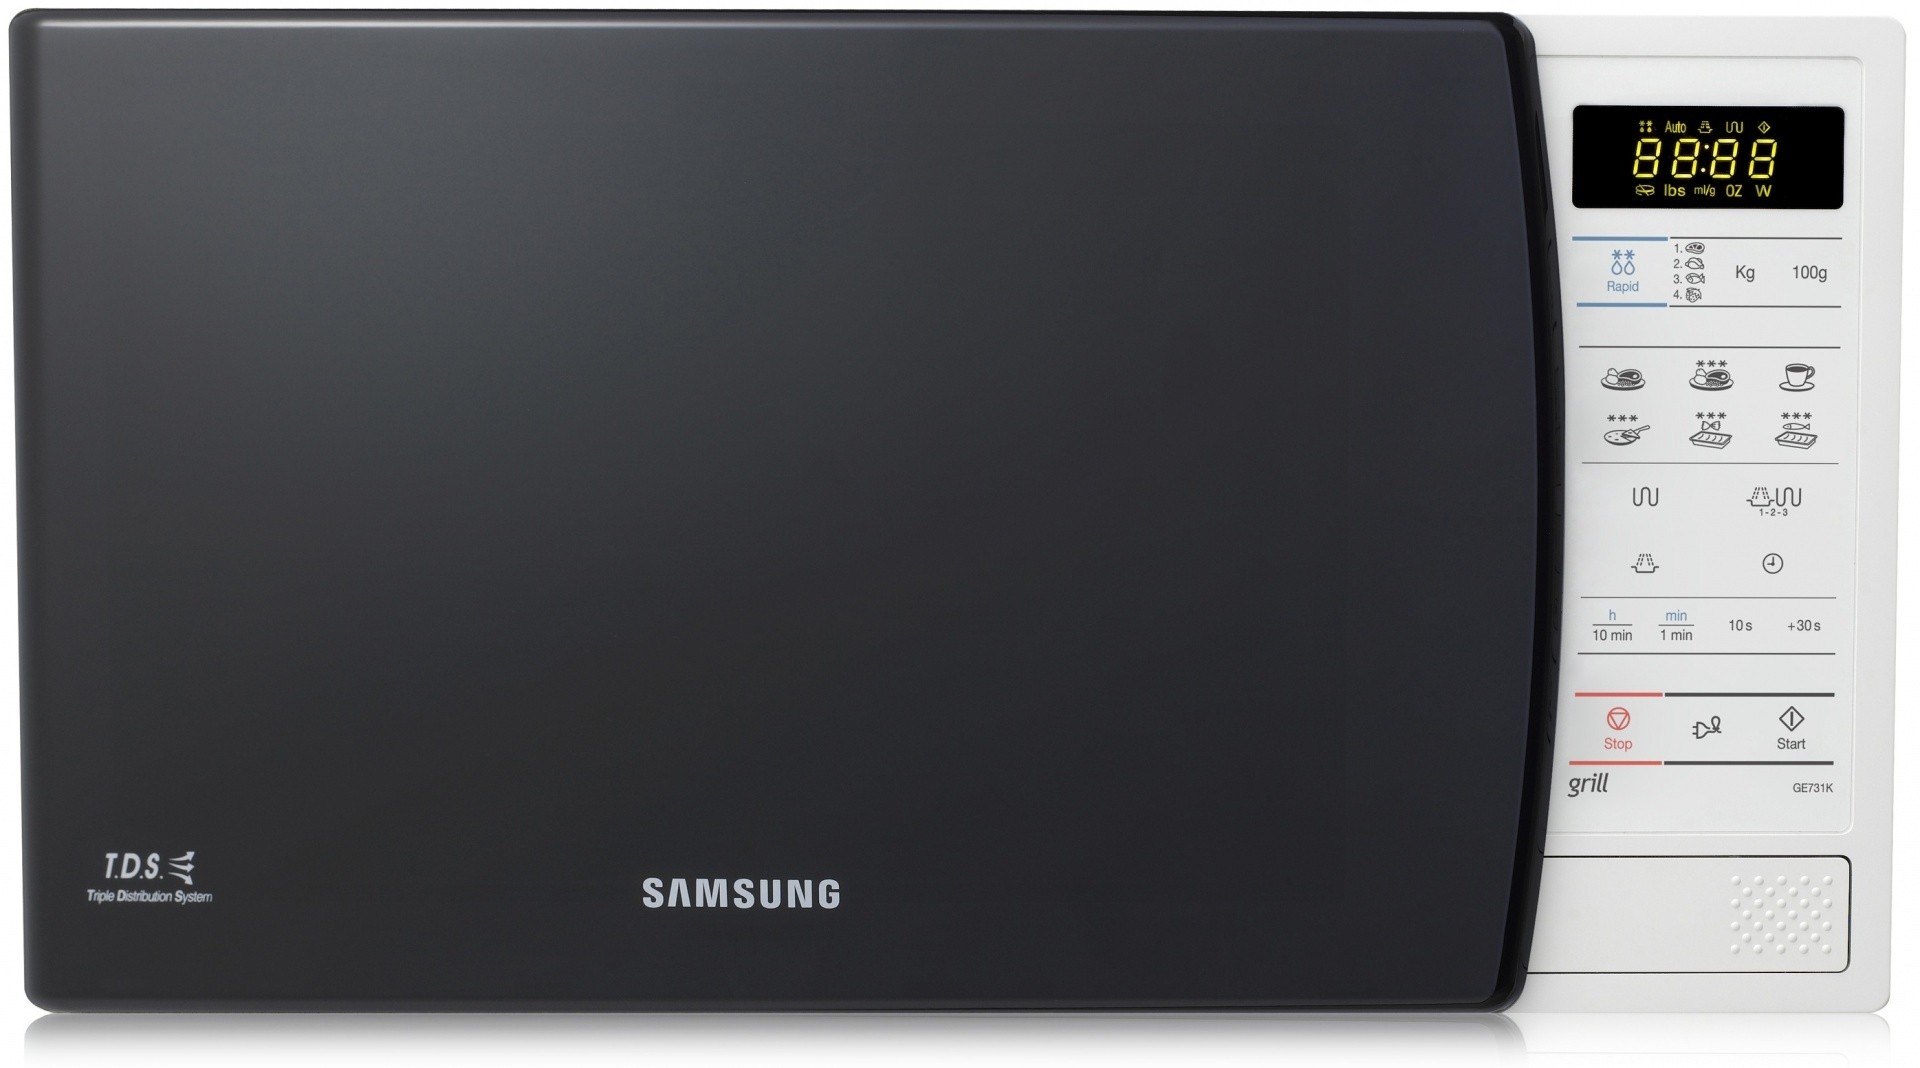 Samsung GE731K - Forno a Microonde Freestanding, 20 Litri, 750 W